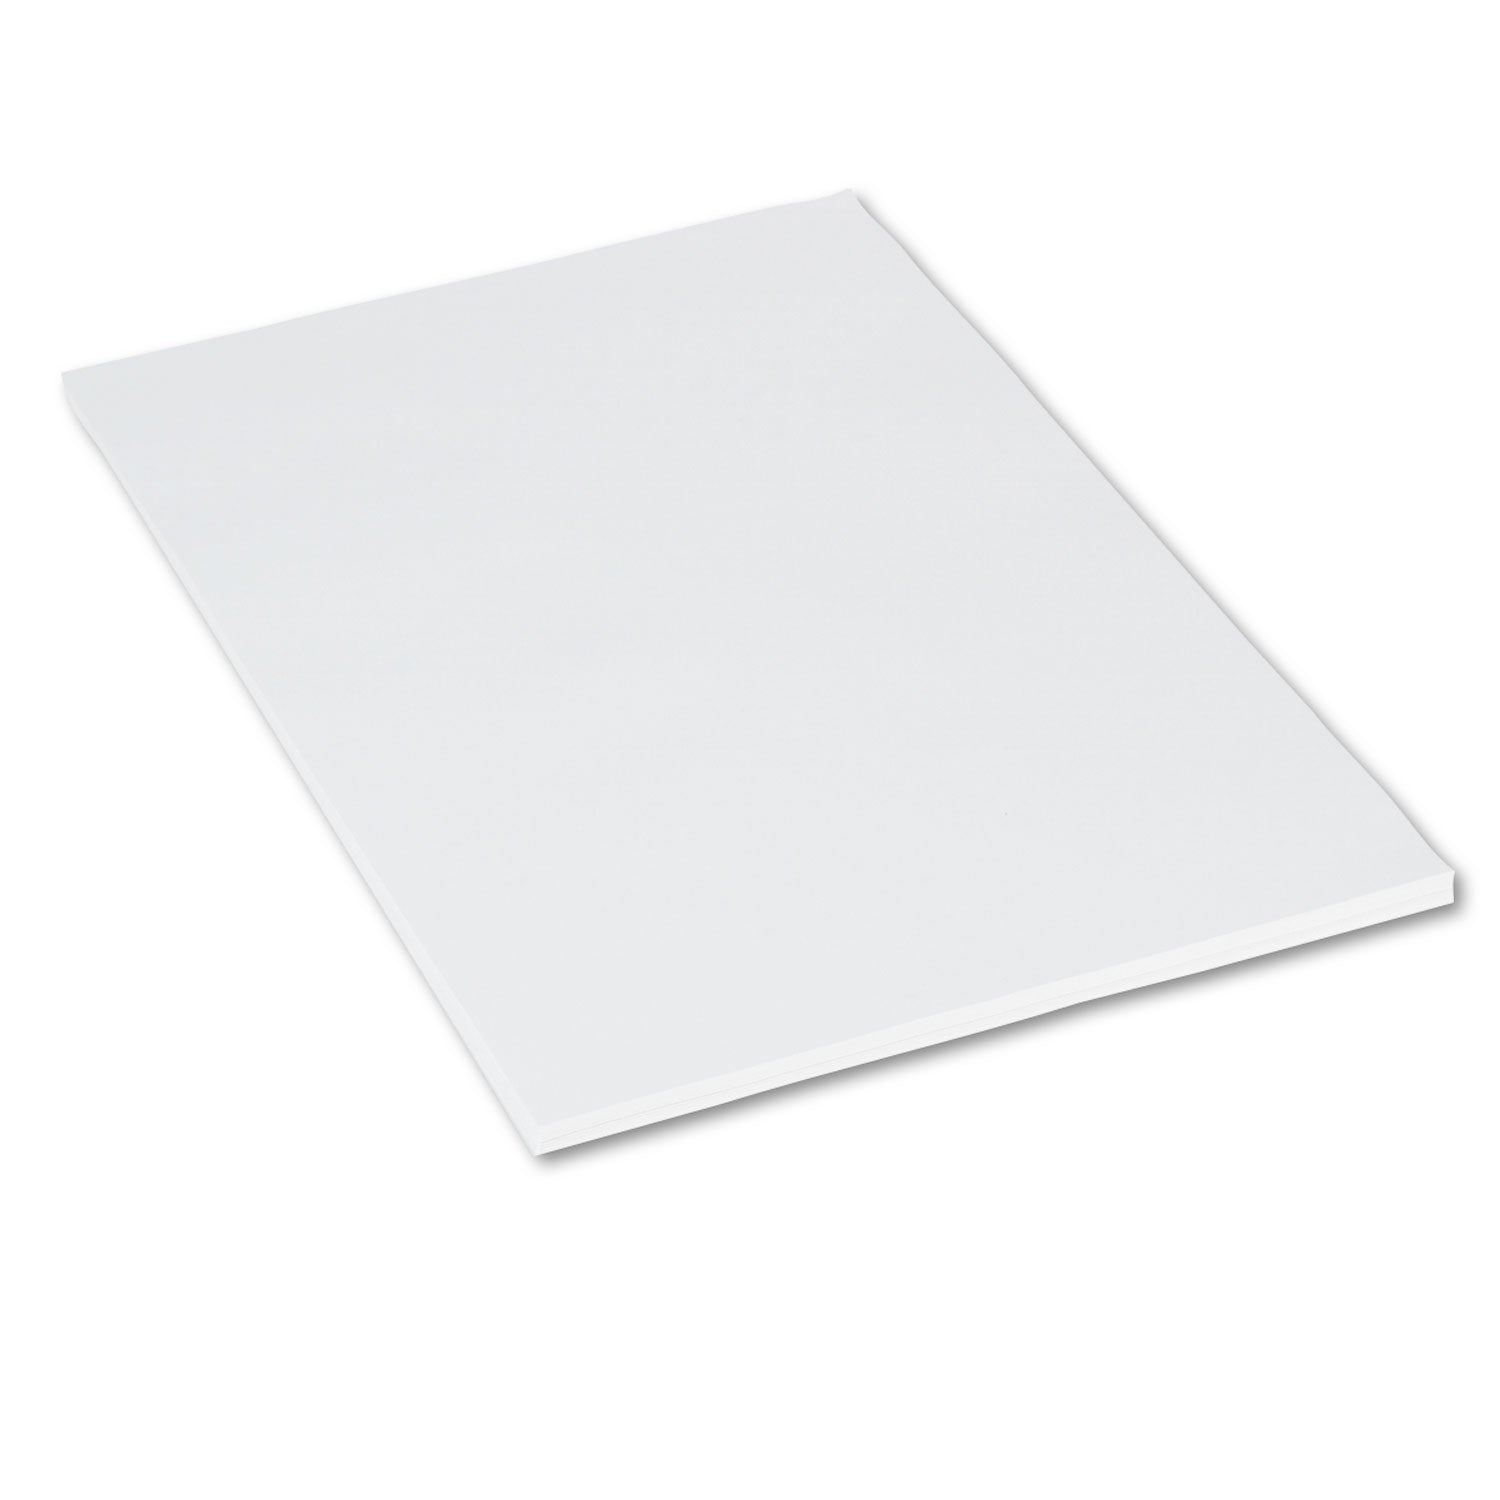 Medium Weight Tagboard, 24 x 36, White, 100/Pack - 